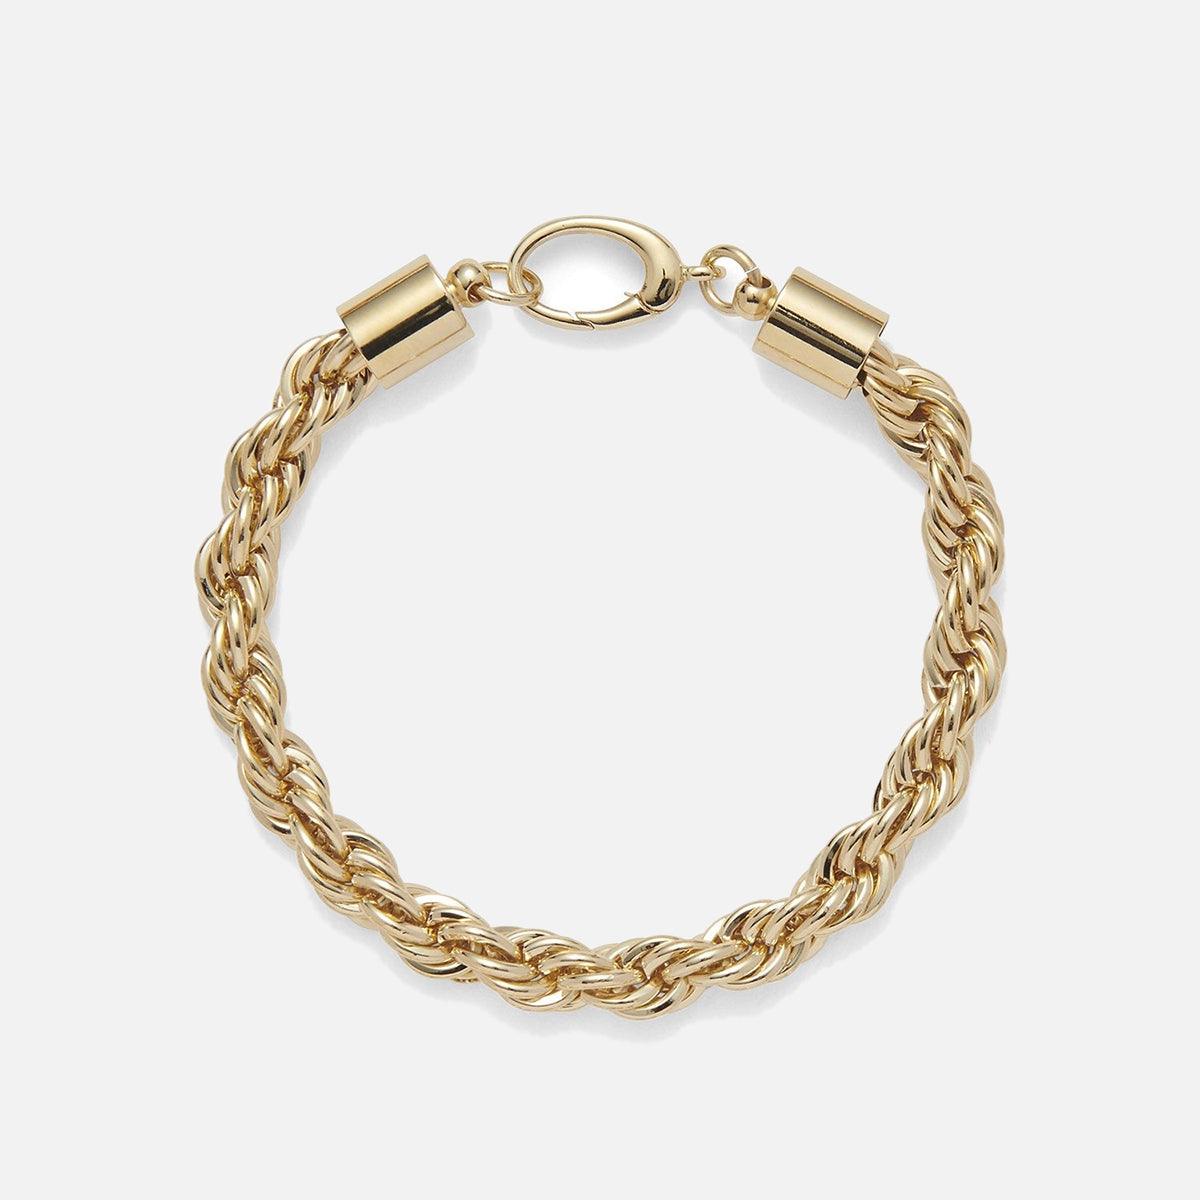 XL Rope Chain Bracelet in Gold - At Present